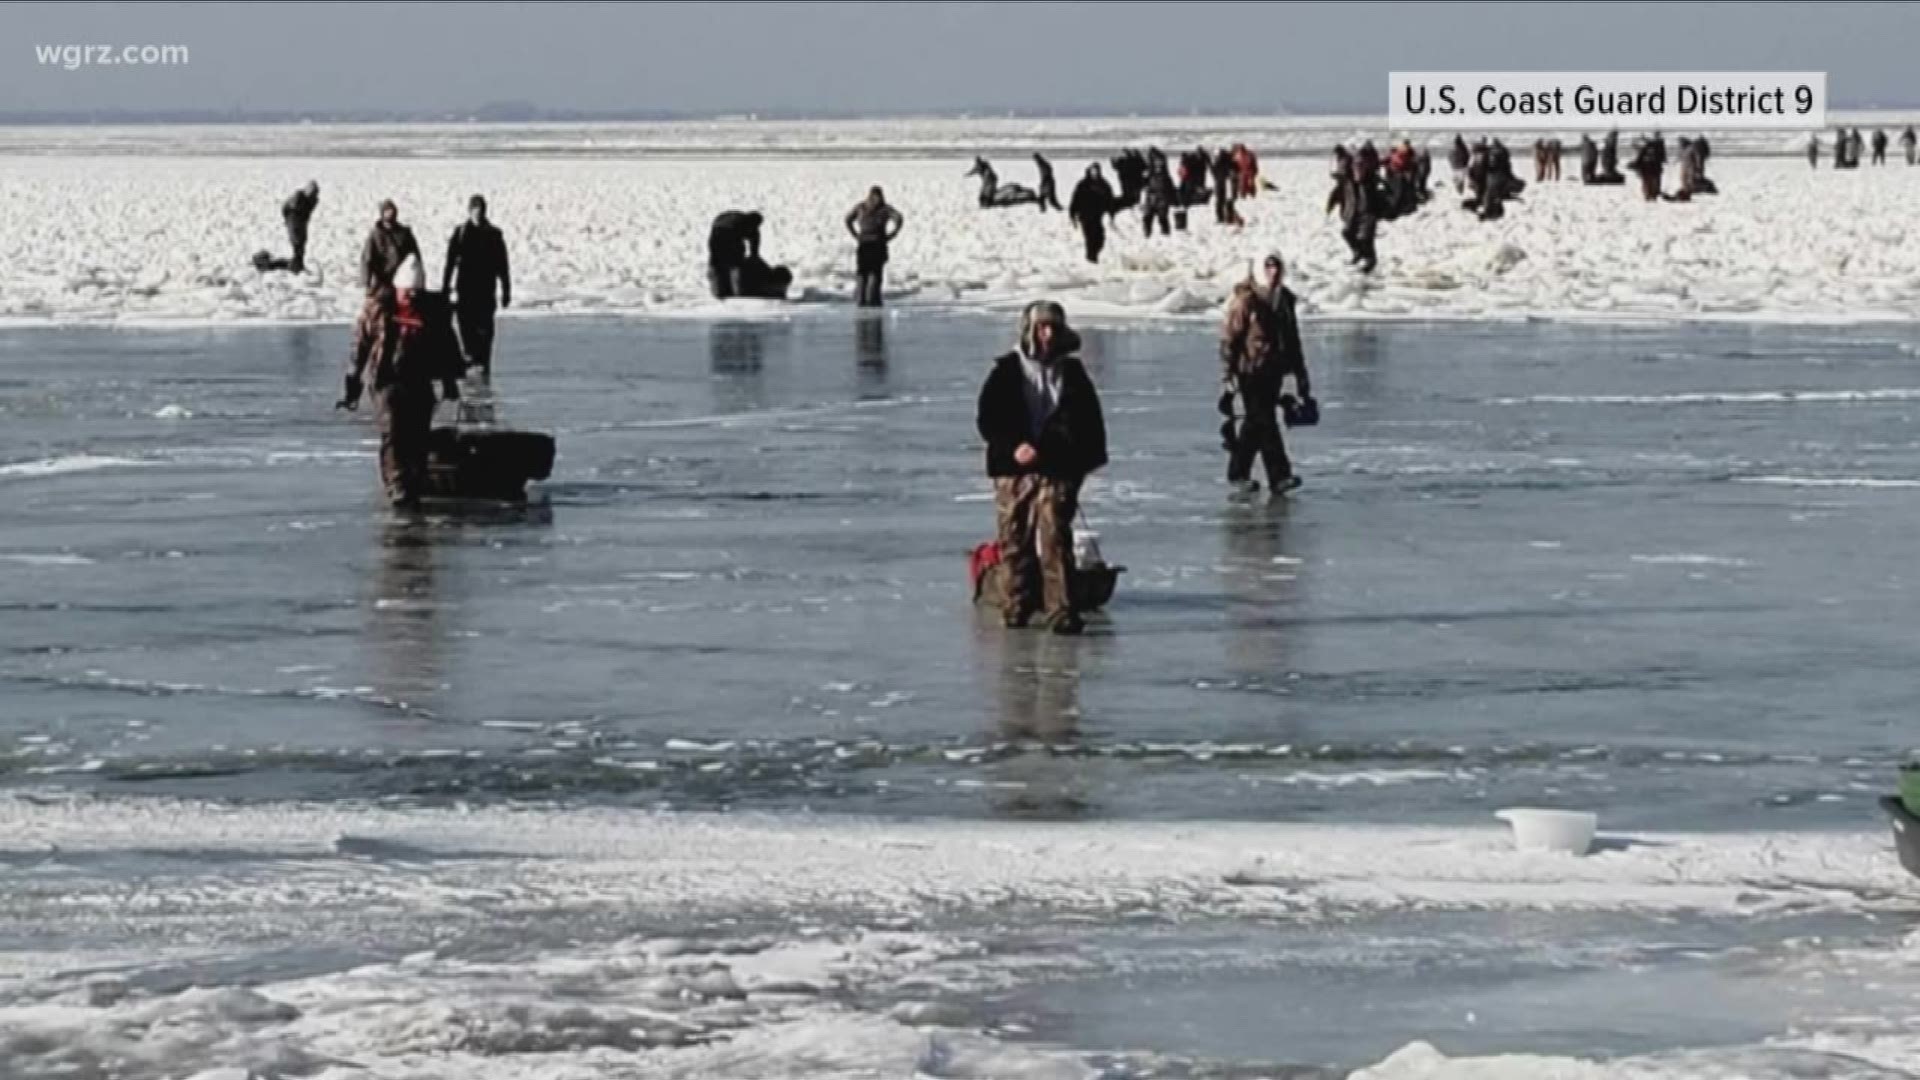 Another 100 people reached safety by either swimming or walking on ice bridges.